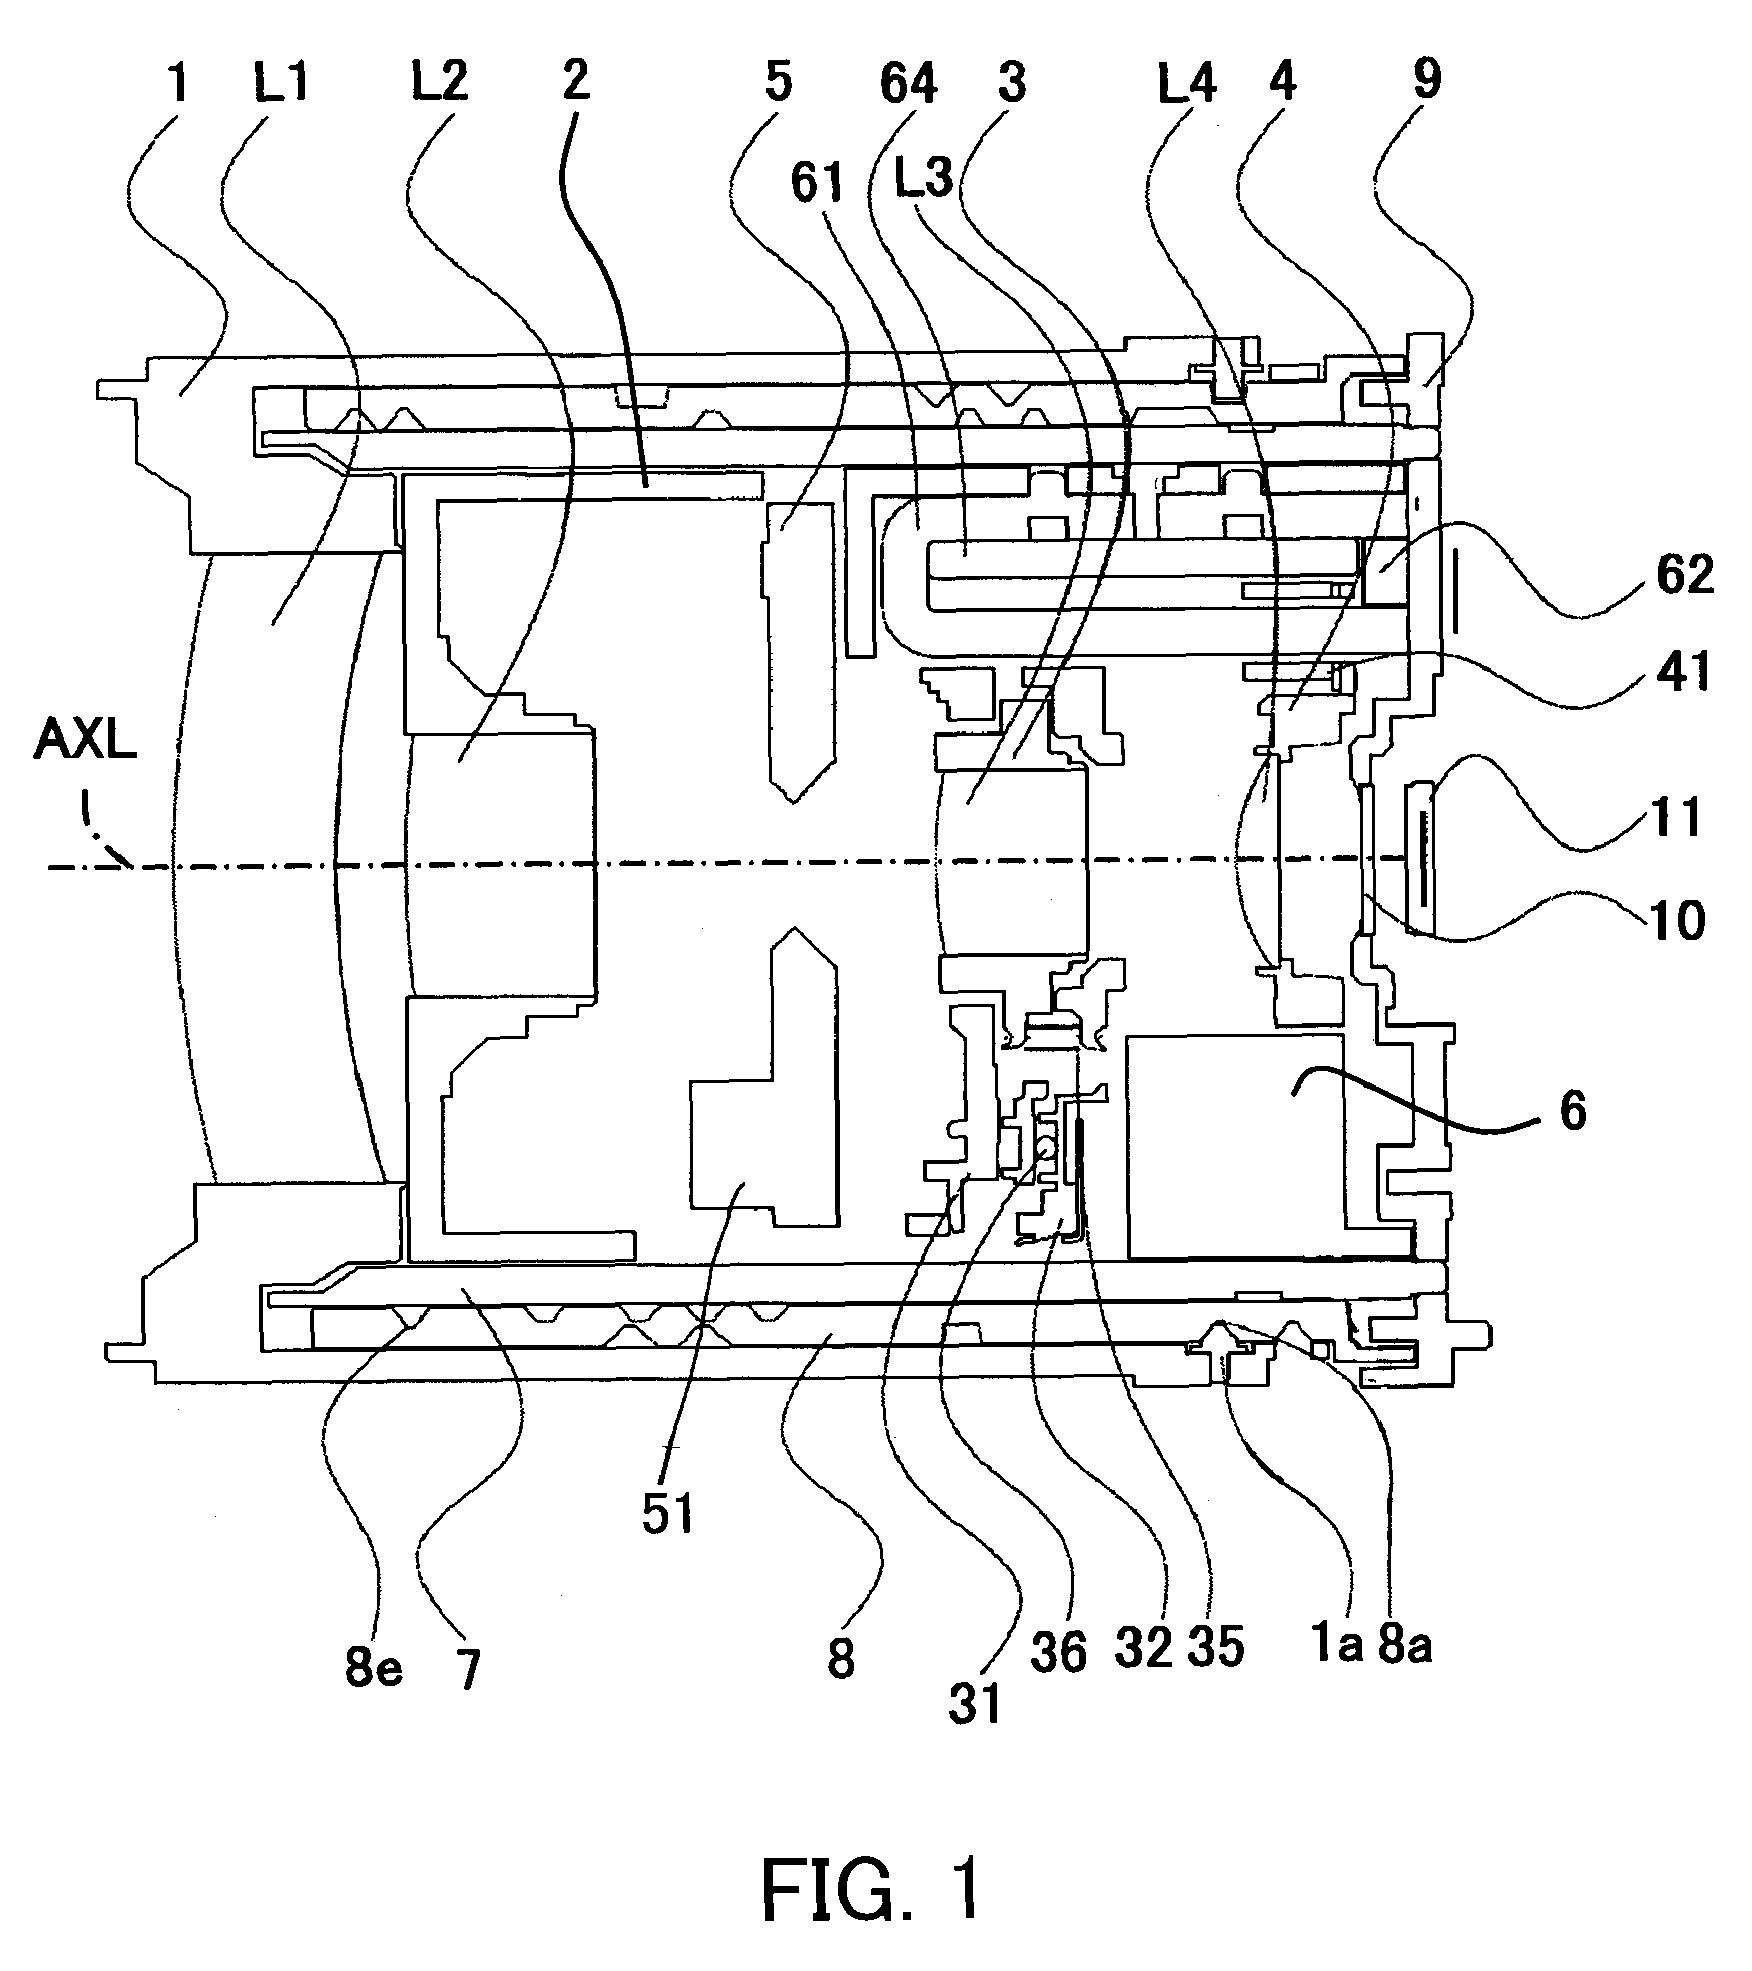 Optical apparatus with image stabilizing and movable lenses and actuators for shifting and/or moving the lenses